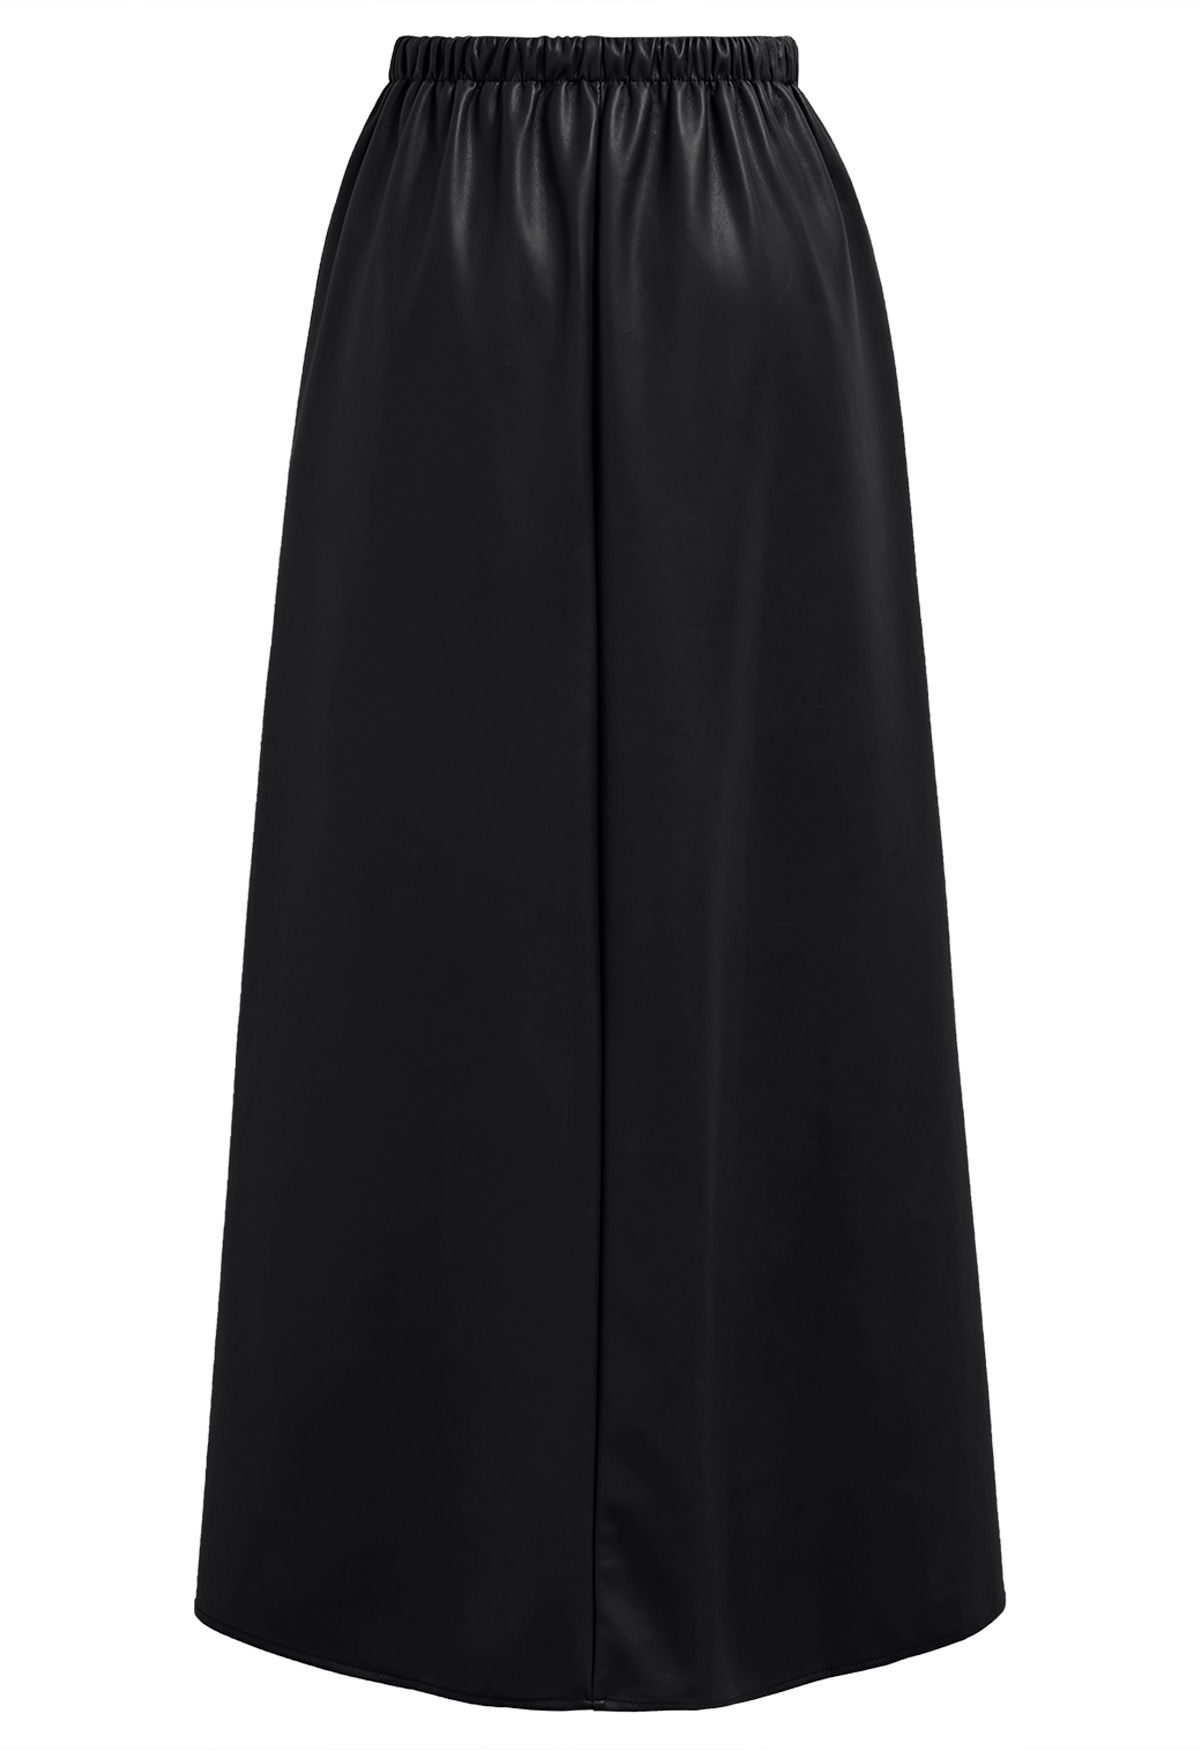 Drawstring Waist Faux Leather Maxi Skirt in Black - Retro, Indie and ...